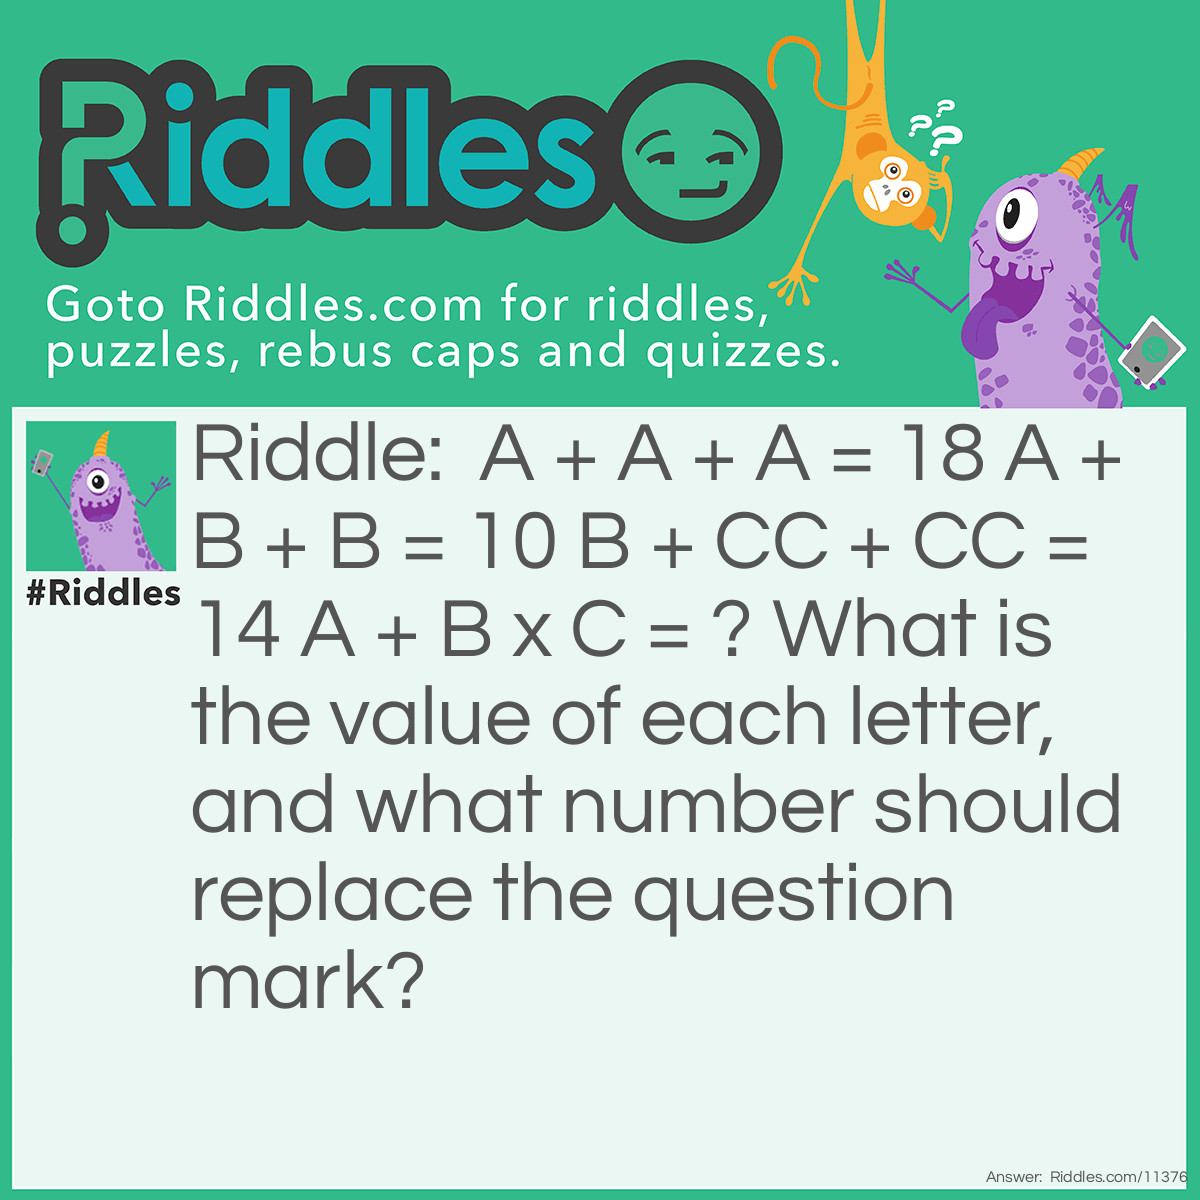 Riddle: A + A + A = 18 A + B + B = 10 B + CC + CC = 14 A + B x C = ? What is the value of each letter, and what number should replace the question mark? Answer: A = 6, B = 2, C = 3, and the number that should replace the question mark is 12.